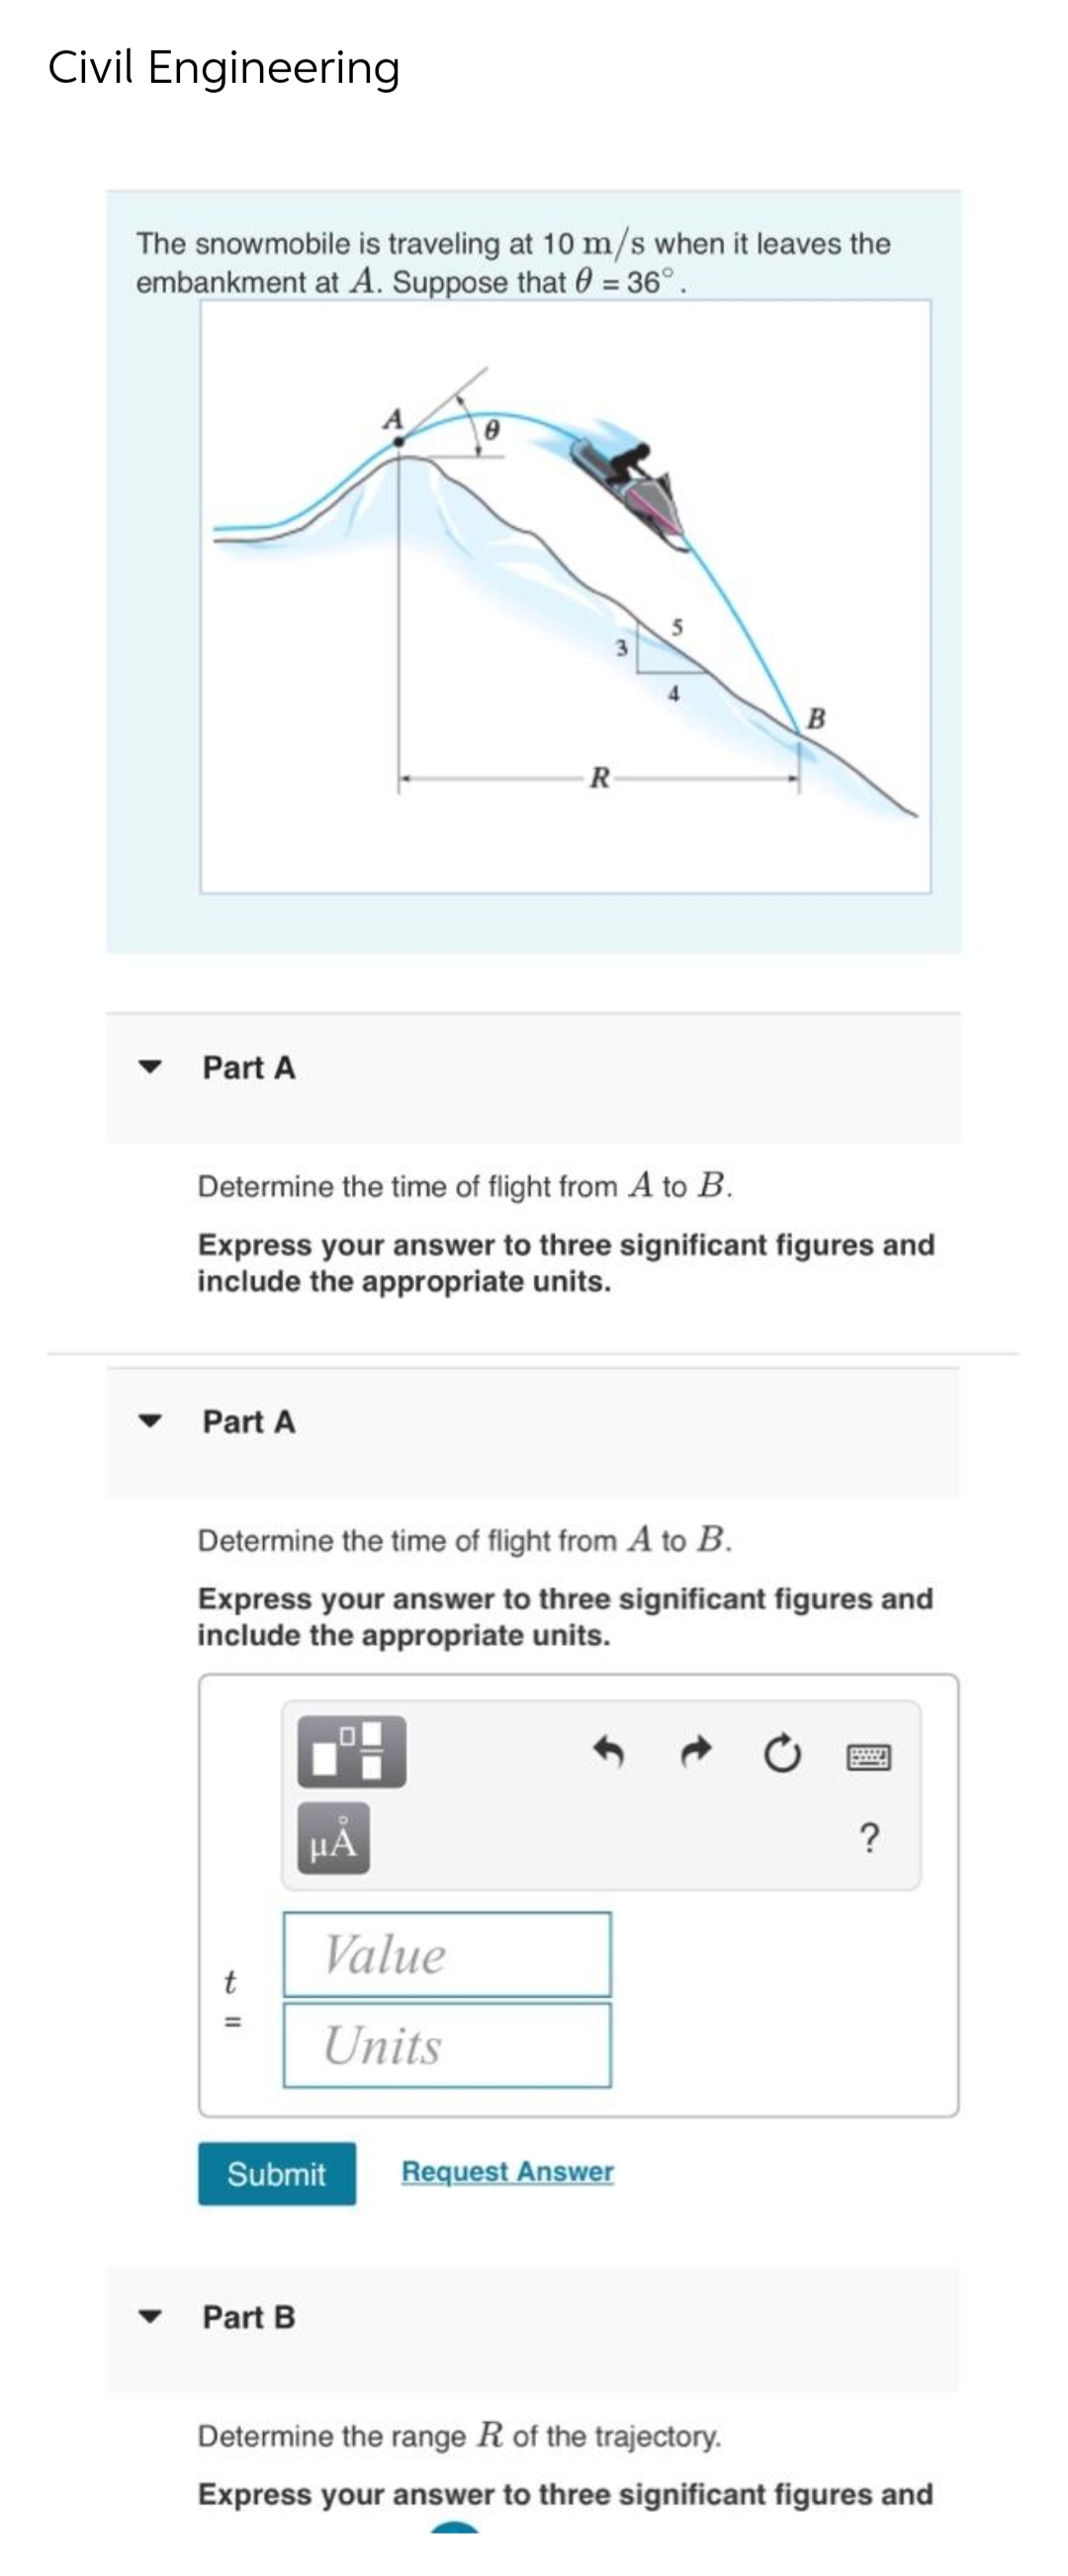 Civil Engineering
The snowmobile is traveling at 10 m/s when it leaves the
embankment at A. Suppose that = 36°.
Part A
Part A
Determine the time of flight from A to B.
Express your answer to three significant figures and
include the appropriate units.
t
R
Determine the time of flight from A to B.
Express your answer to three significant figures and
include the appropriate units.
μÃ
Part B
Value
Units
5
Submit Request Answer
B
?
Determine the range R of the trajectory.
Express your answer to three significant figures and